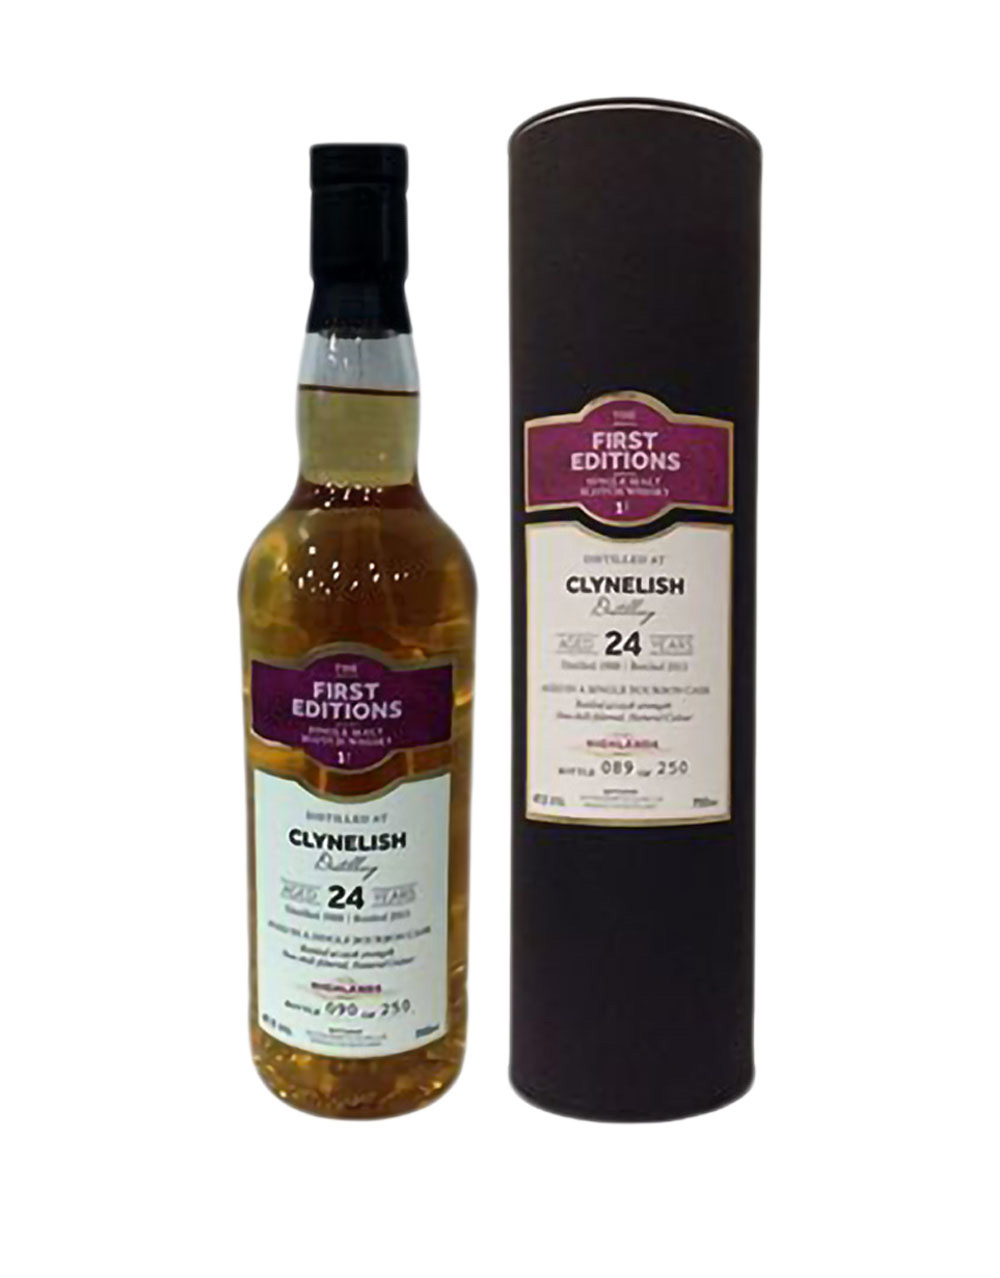 Clynelish The First Editions 24 Year Old Single Malt Scotch Whisky